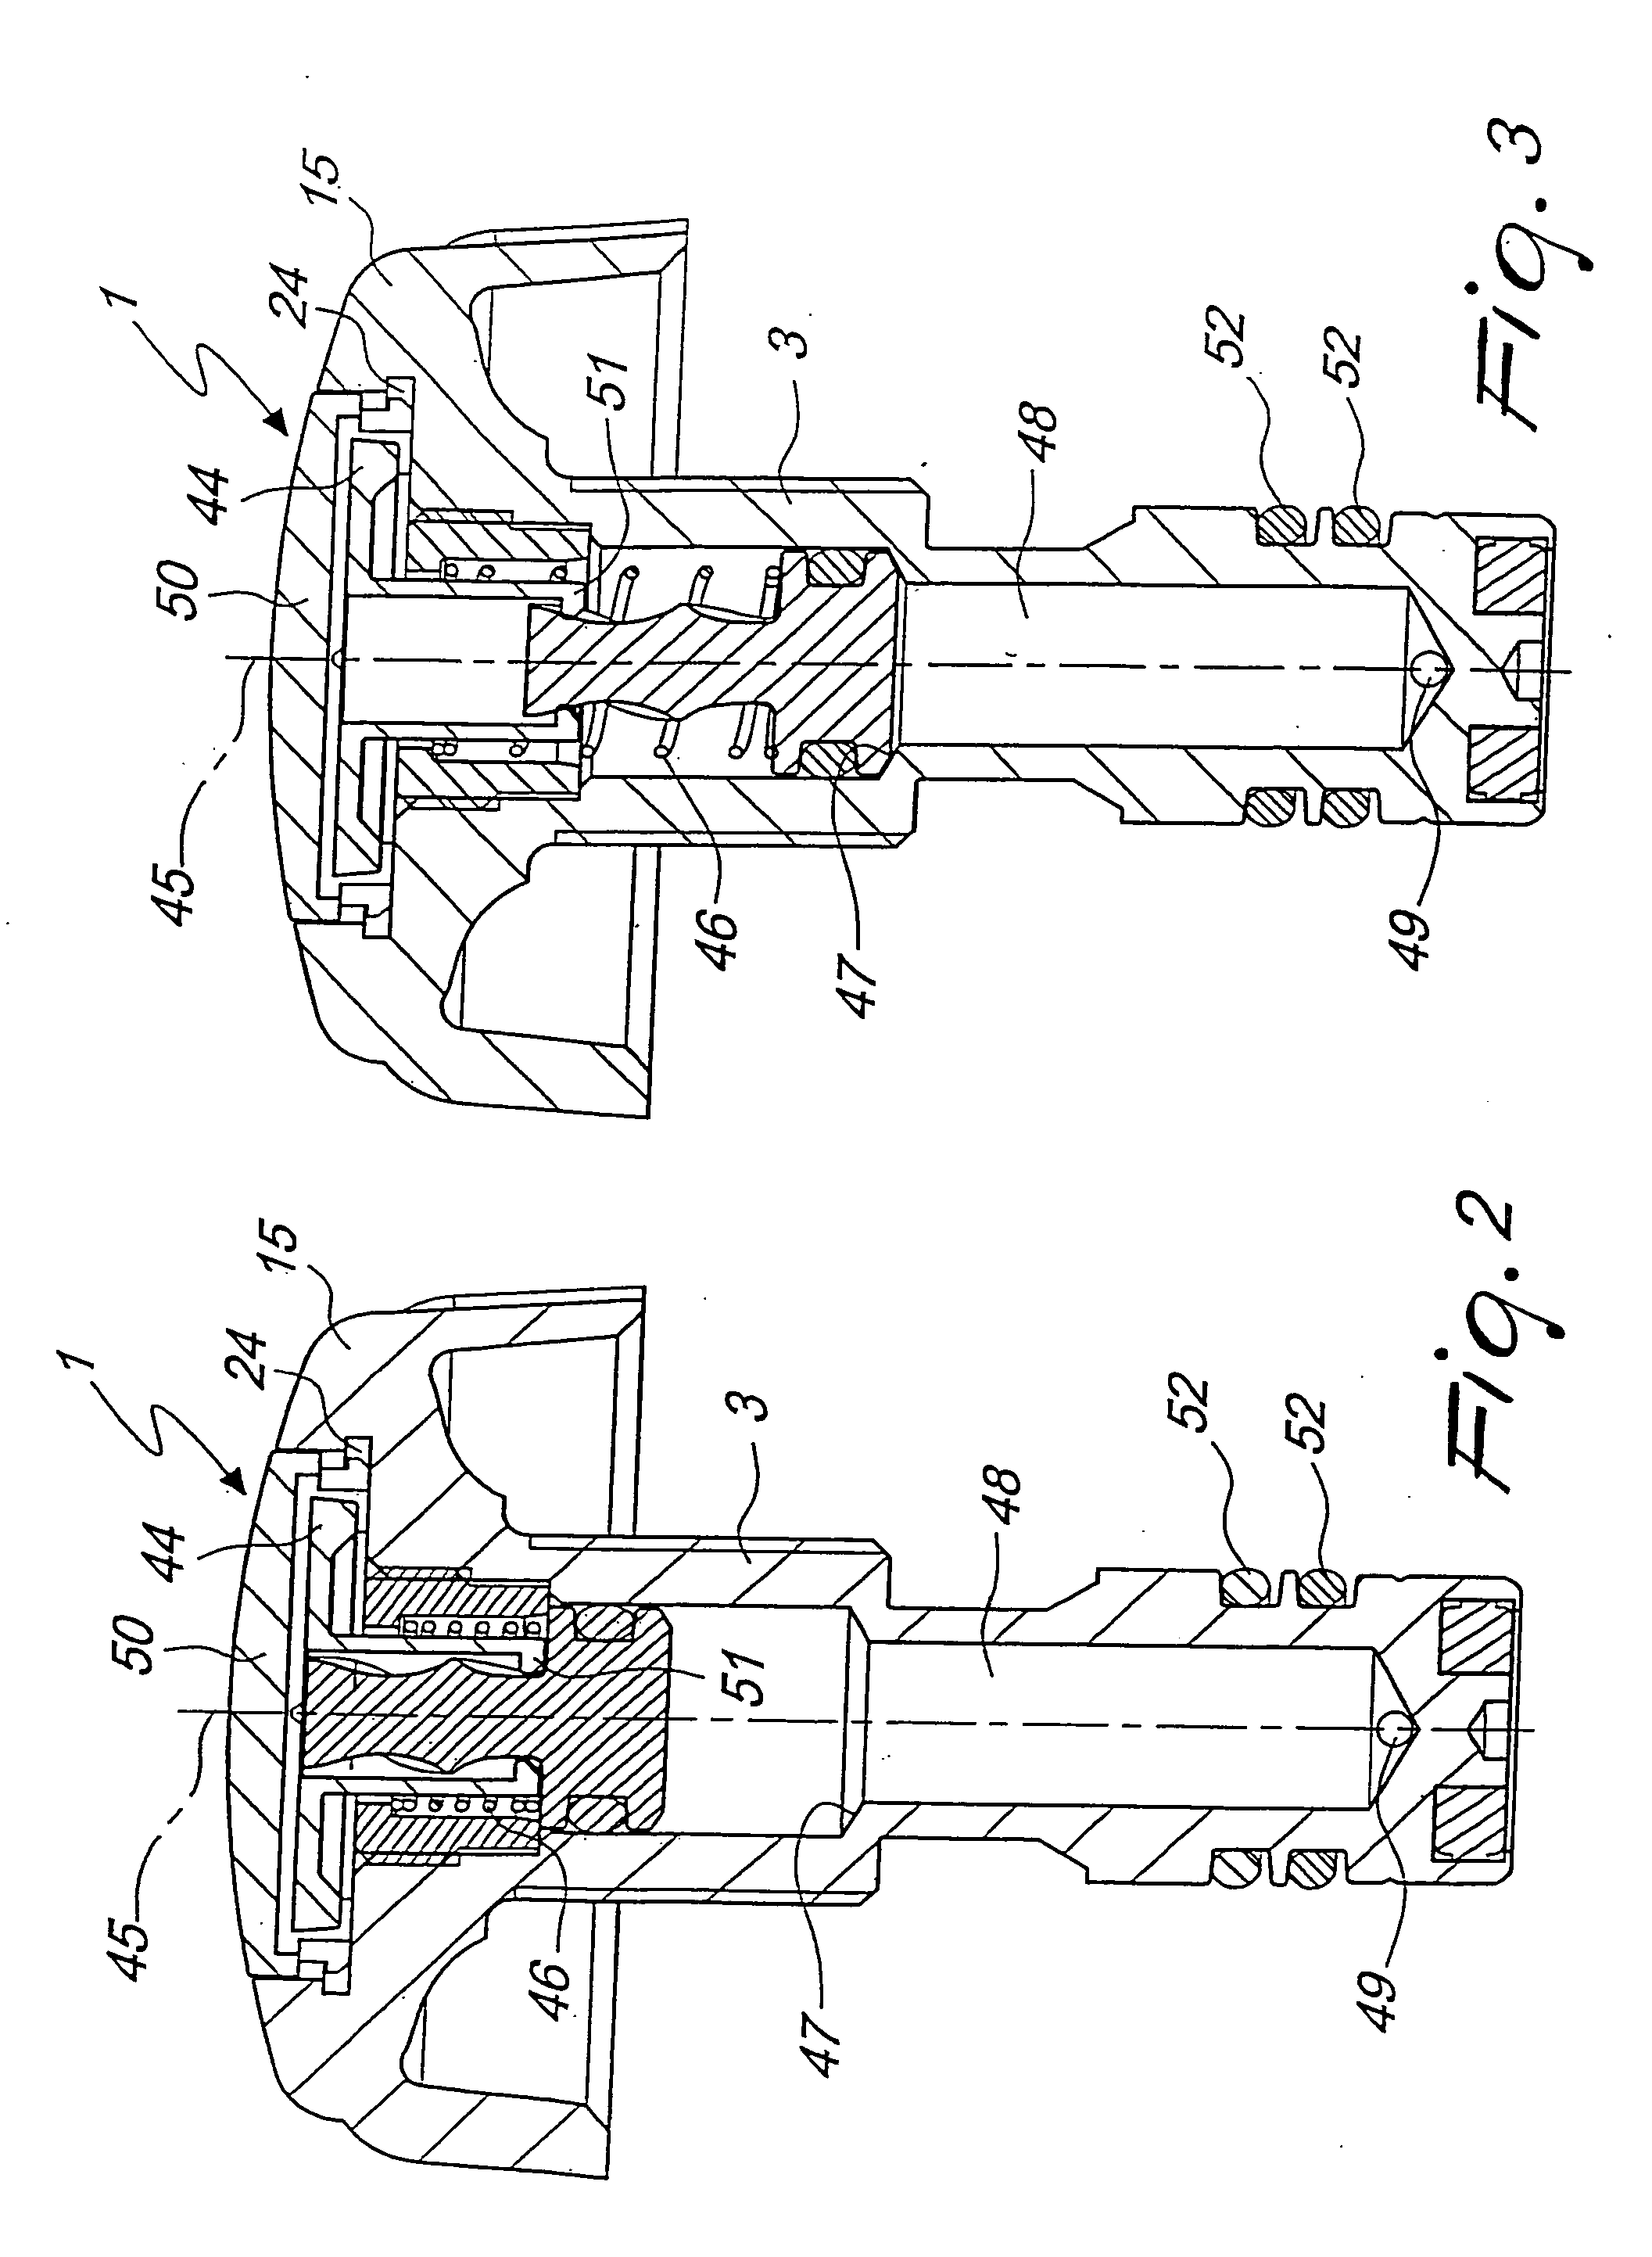 Flow control valve with device for indicating the status of a fluid, particularly for gas containers